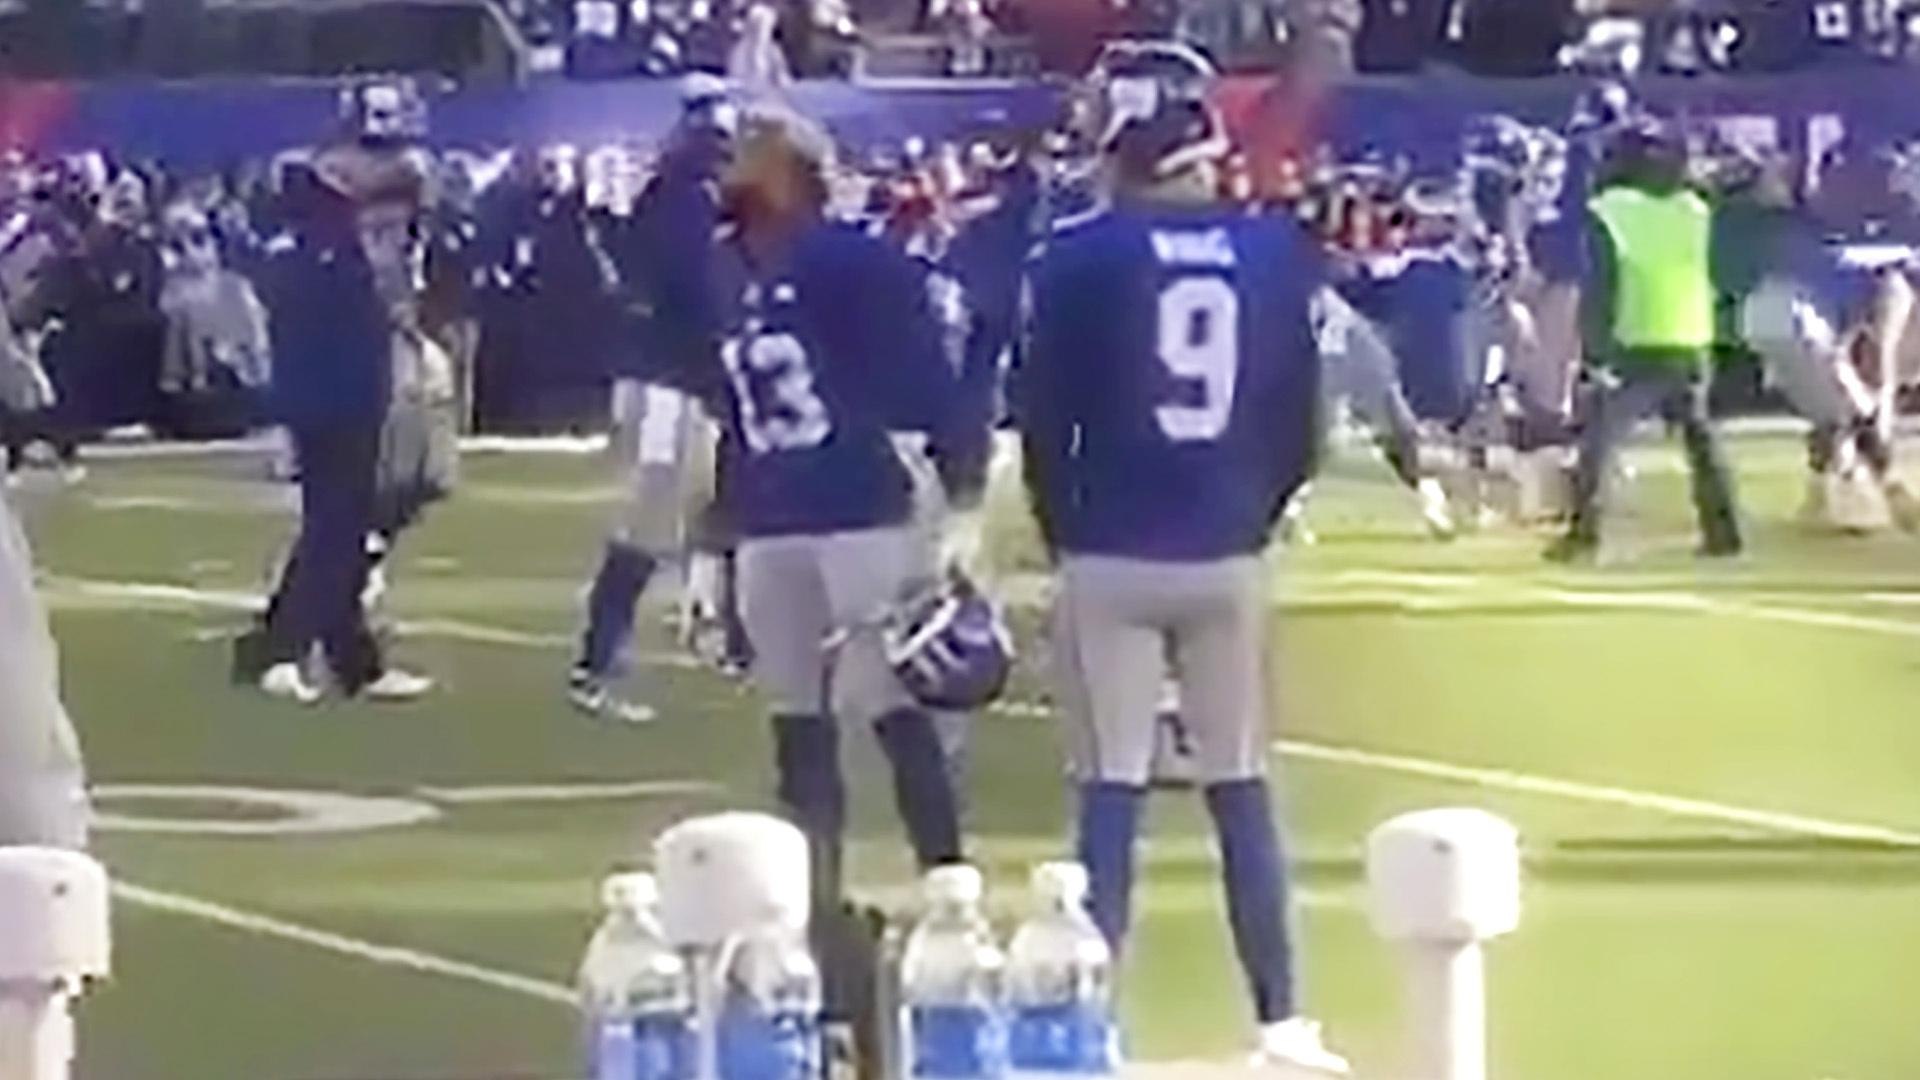 Panthers Player Allegedly Threatened Odell Beckham Jr. Before Giants-Panthers Game